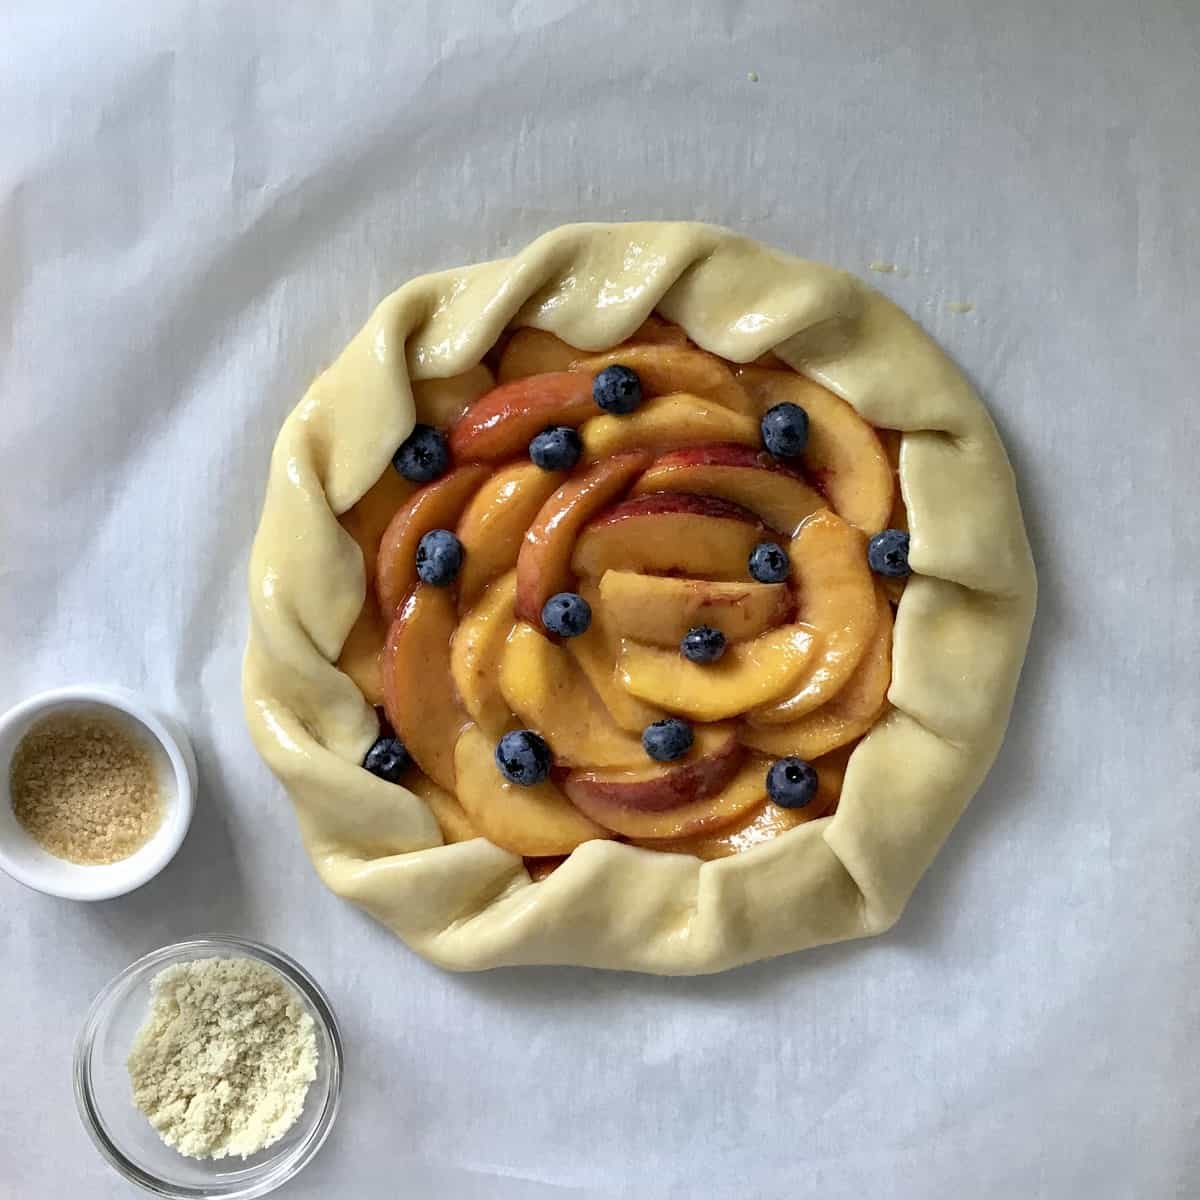 An uncooked Italian peach tart on parchment paper.